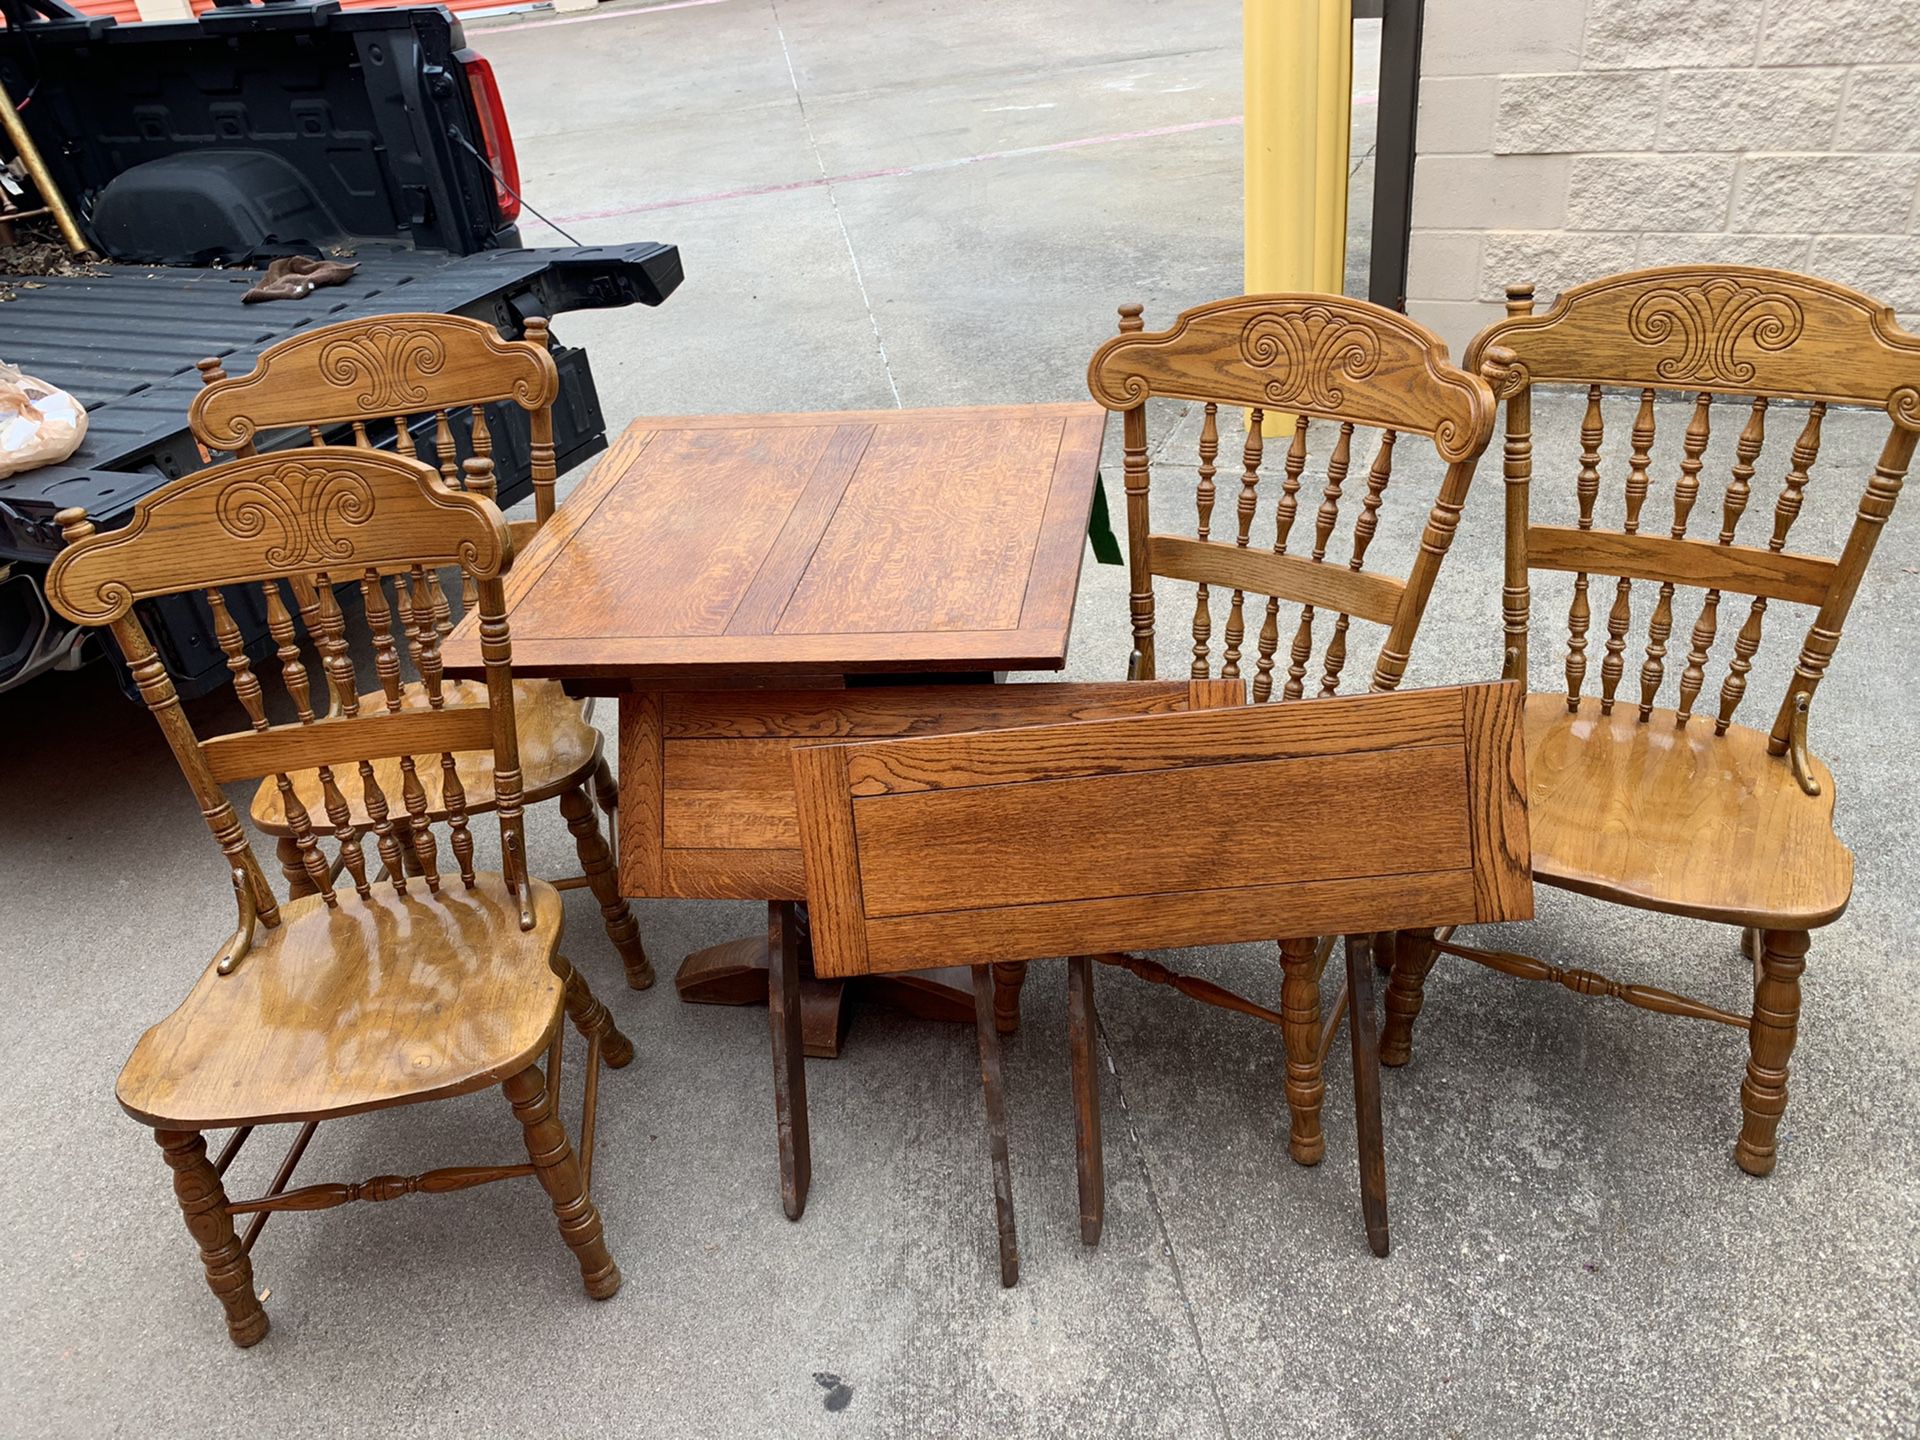 Wooden dinner table with 4 chairs